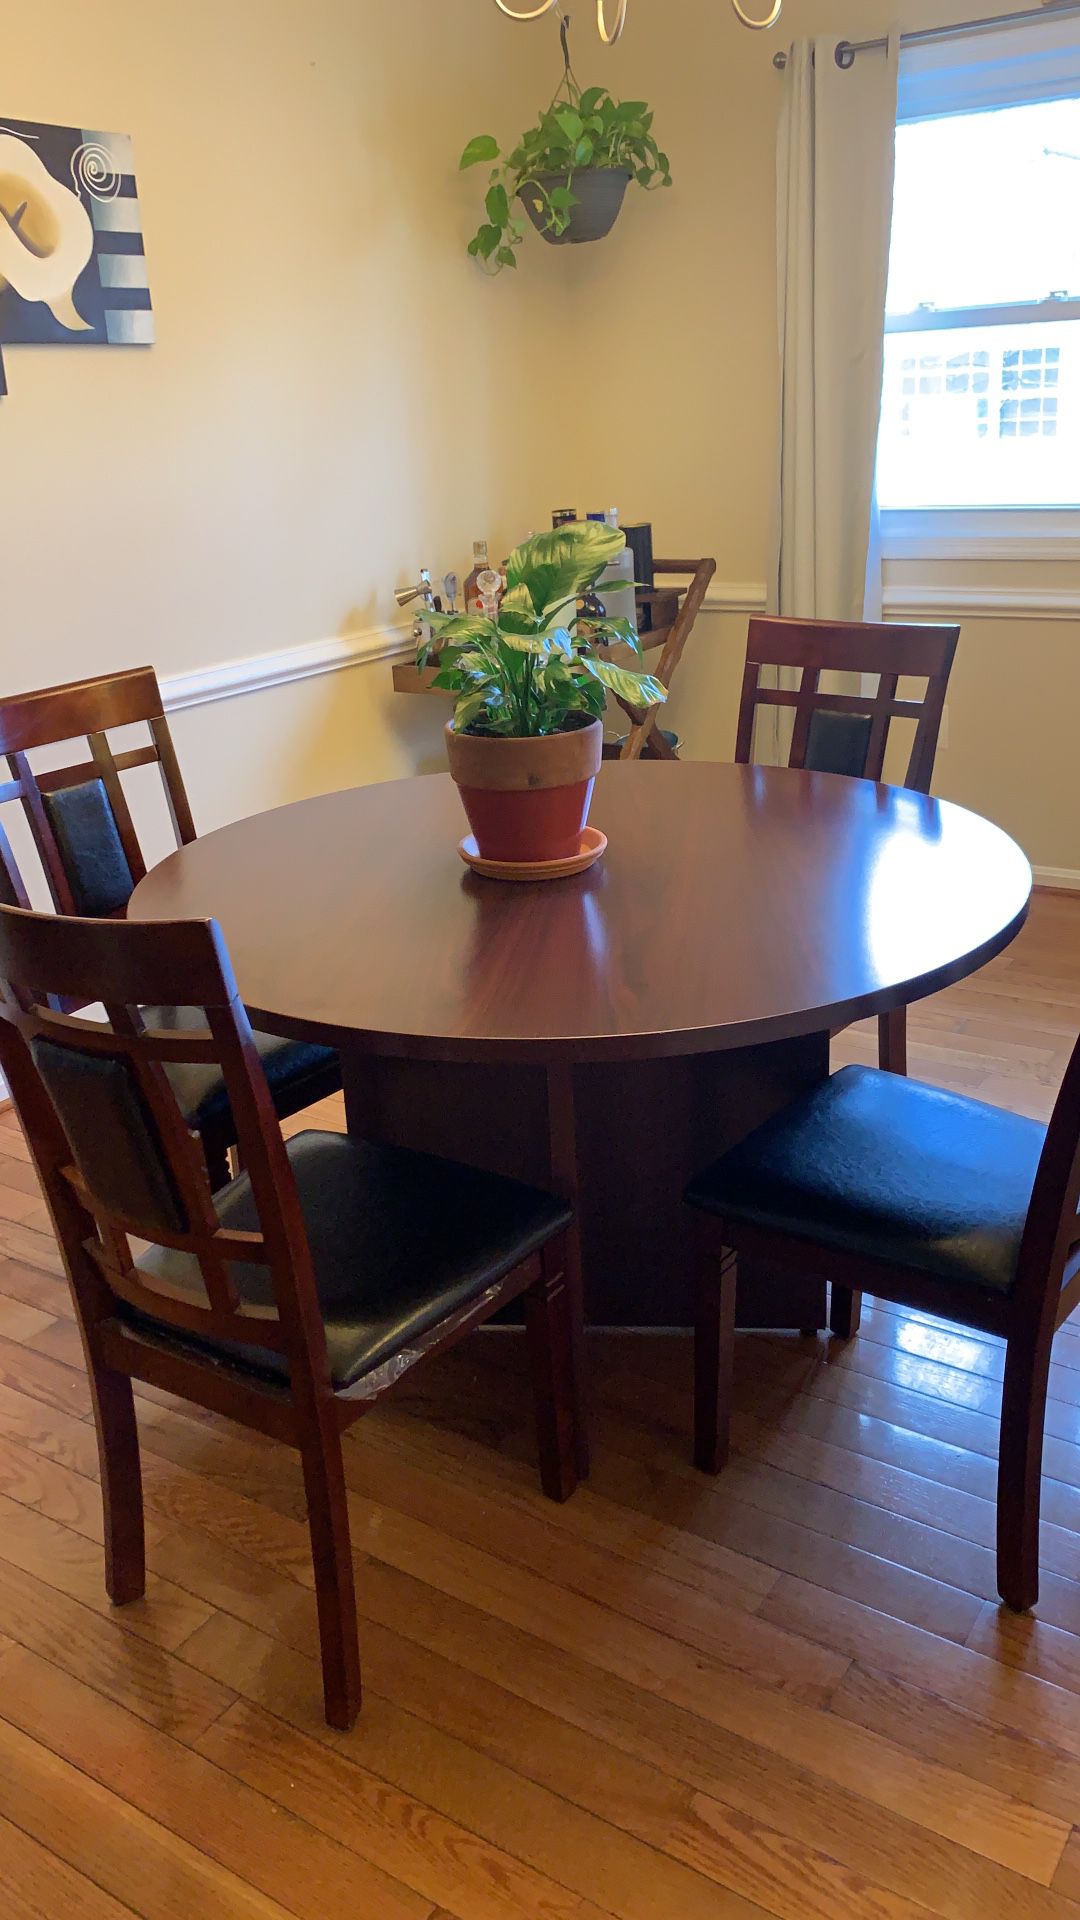 Wooden dining set with 4 chairs it’s almost new in very good condition.